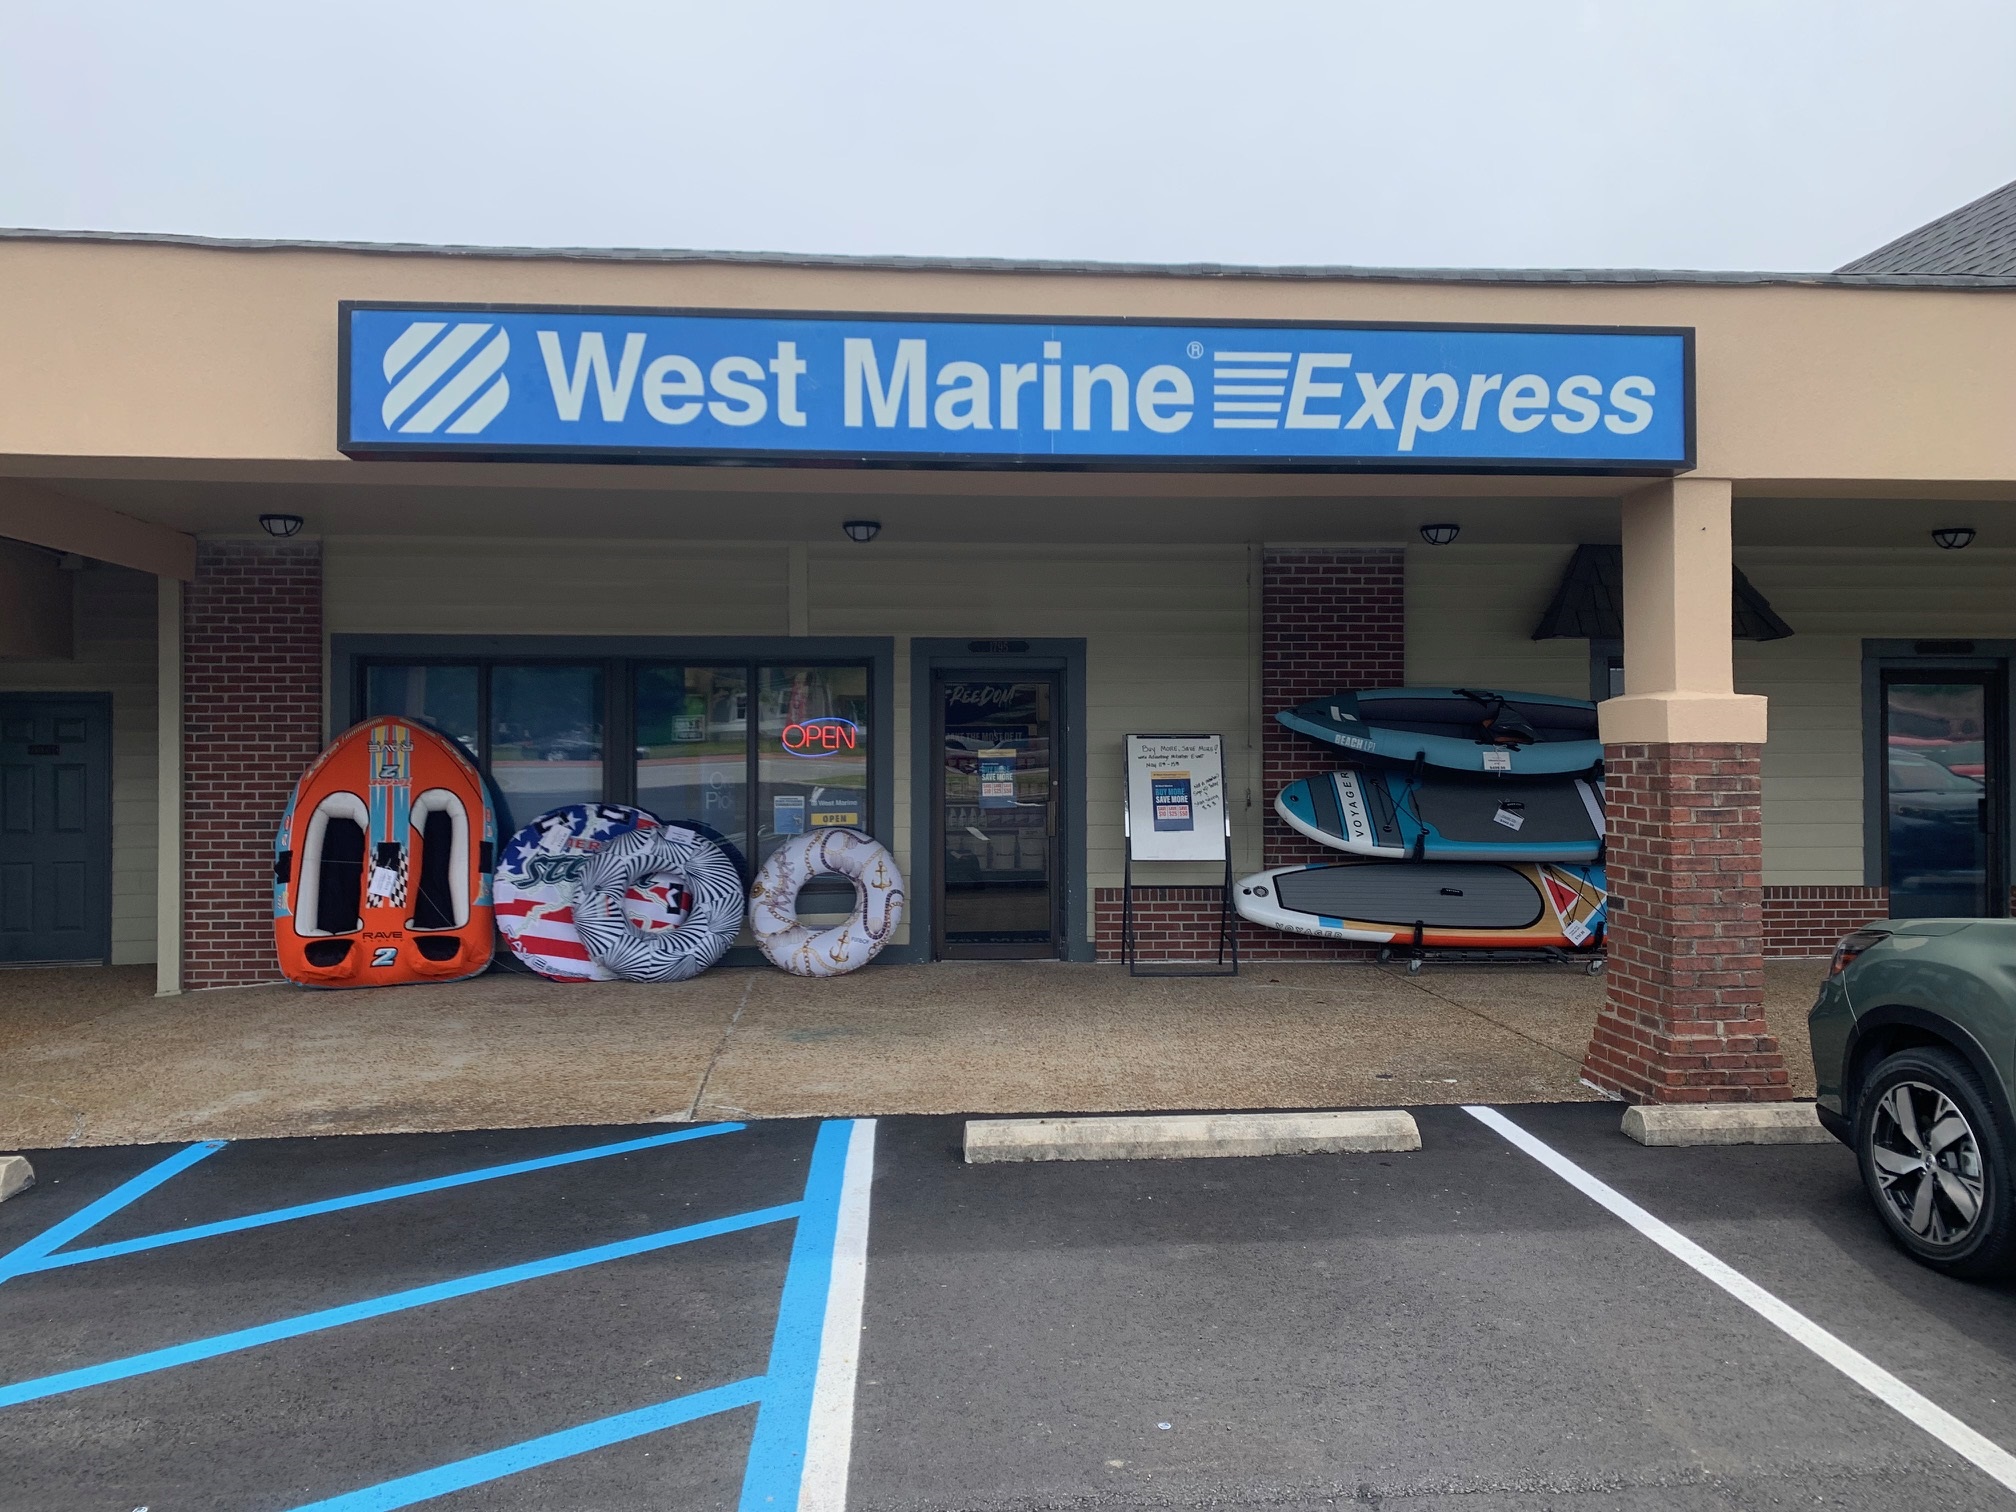 Boat Supplies, Fishing Gear & More - Gloucester Point, VA 23062